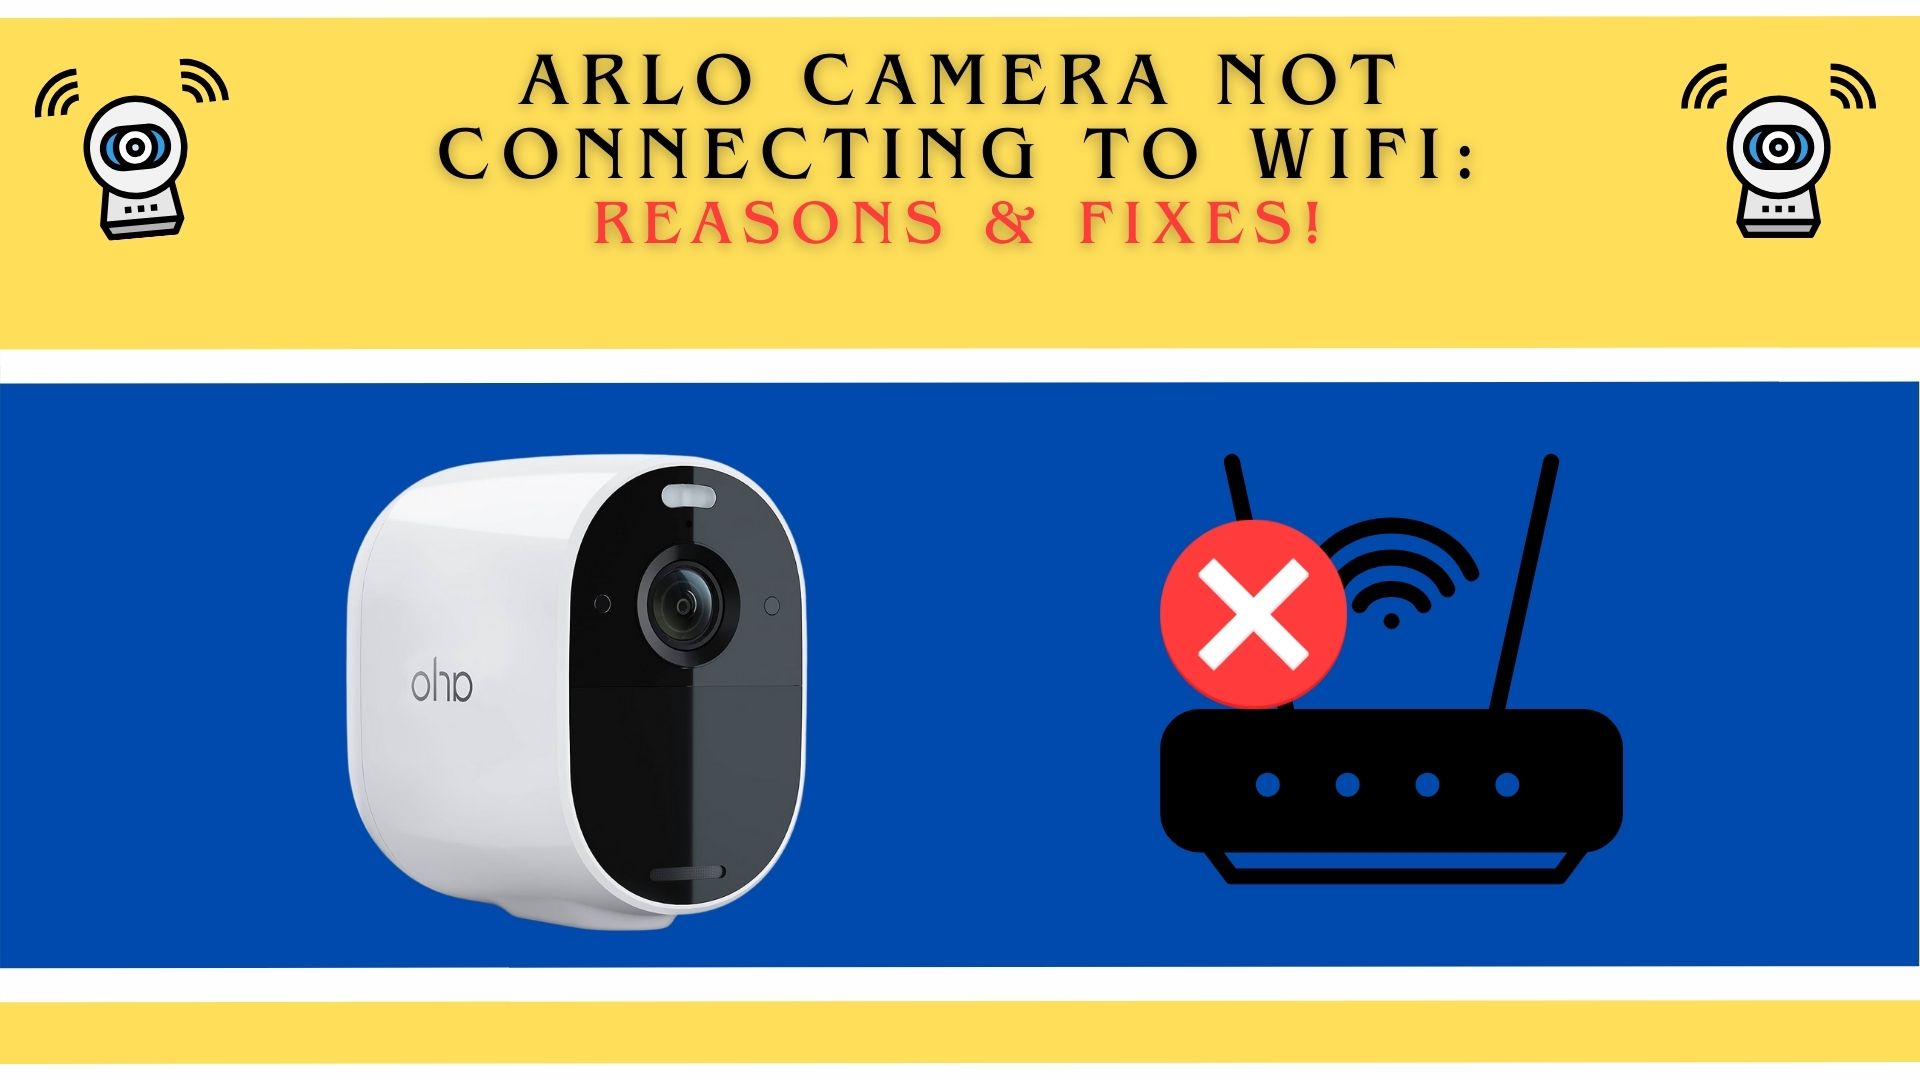 Arlo camera not connecting to WiFi